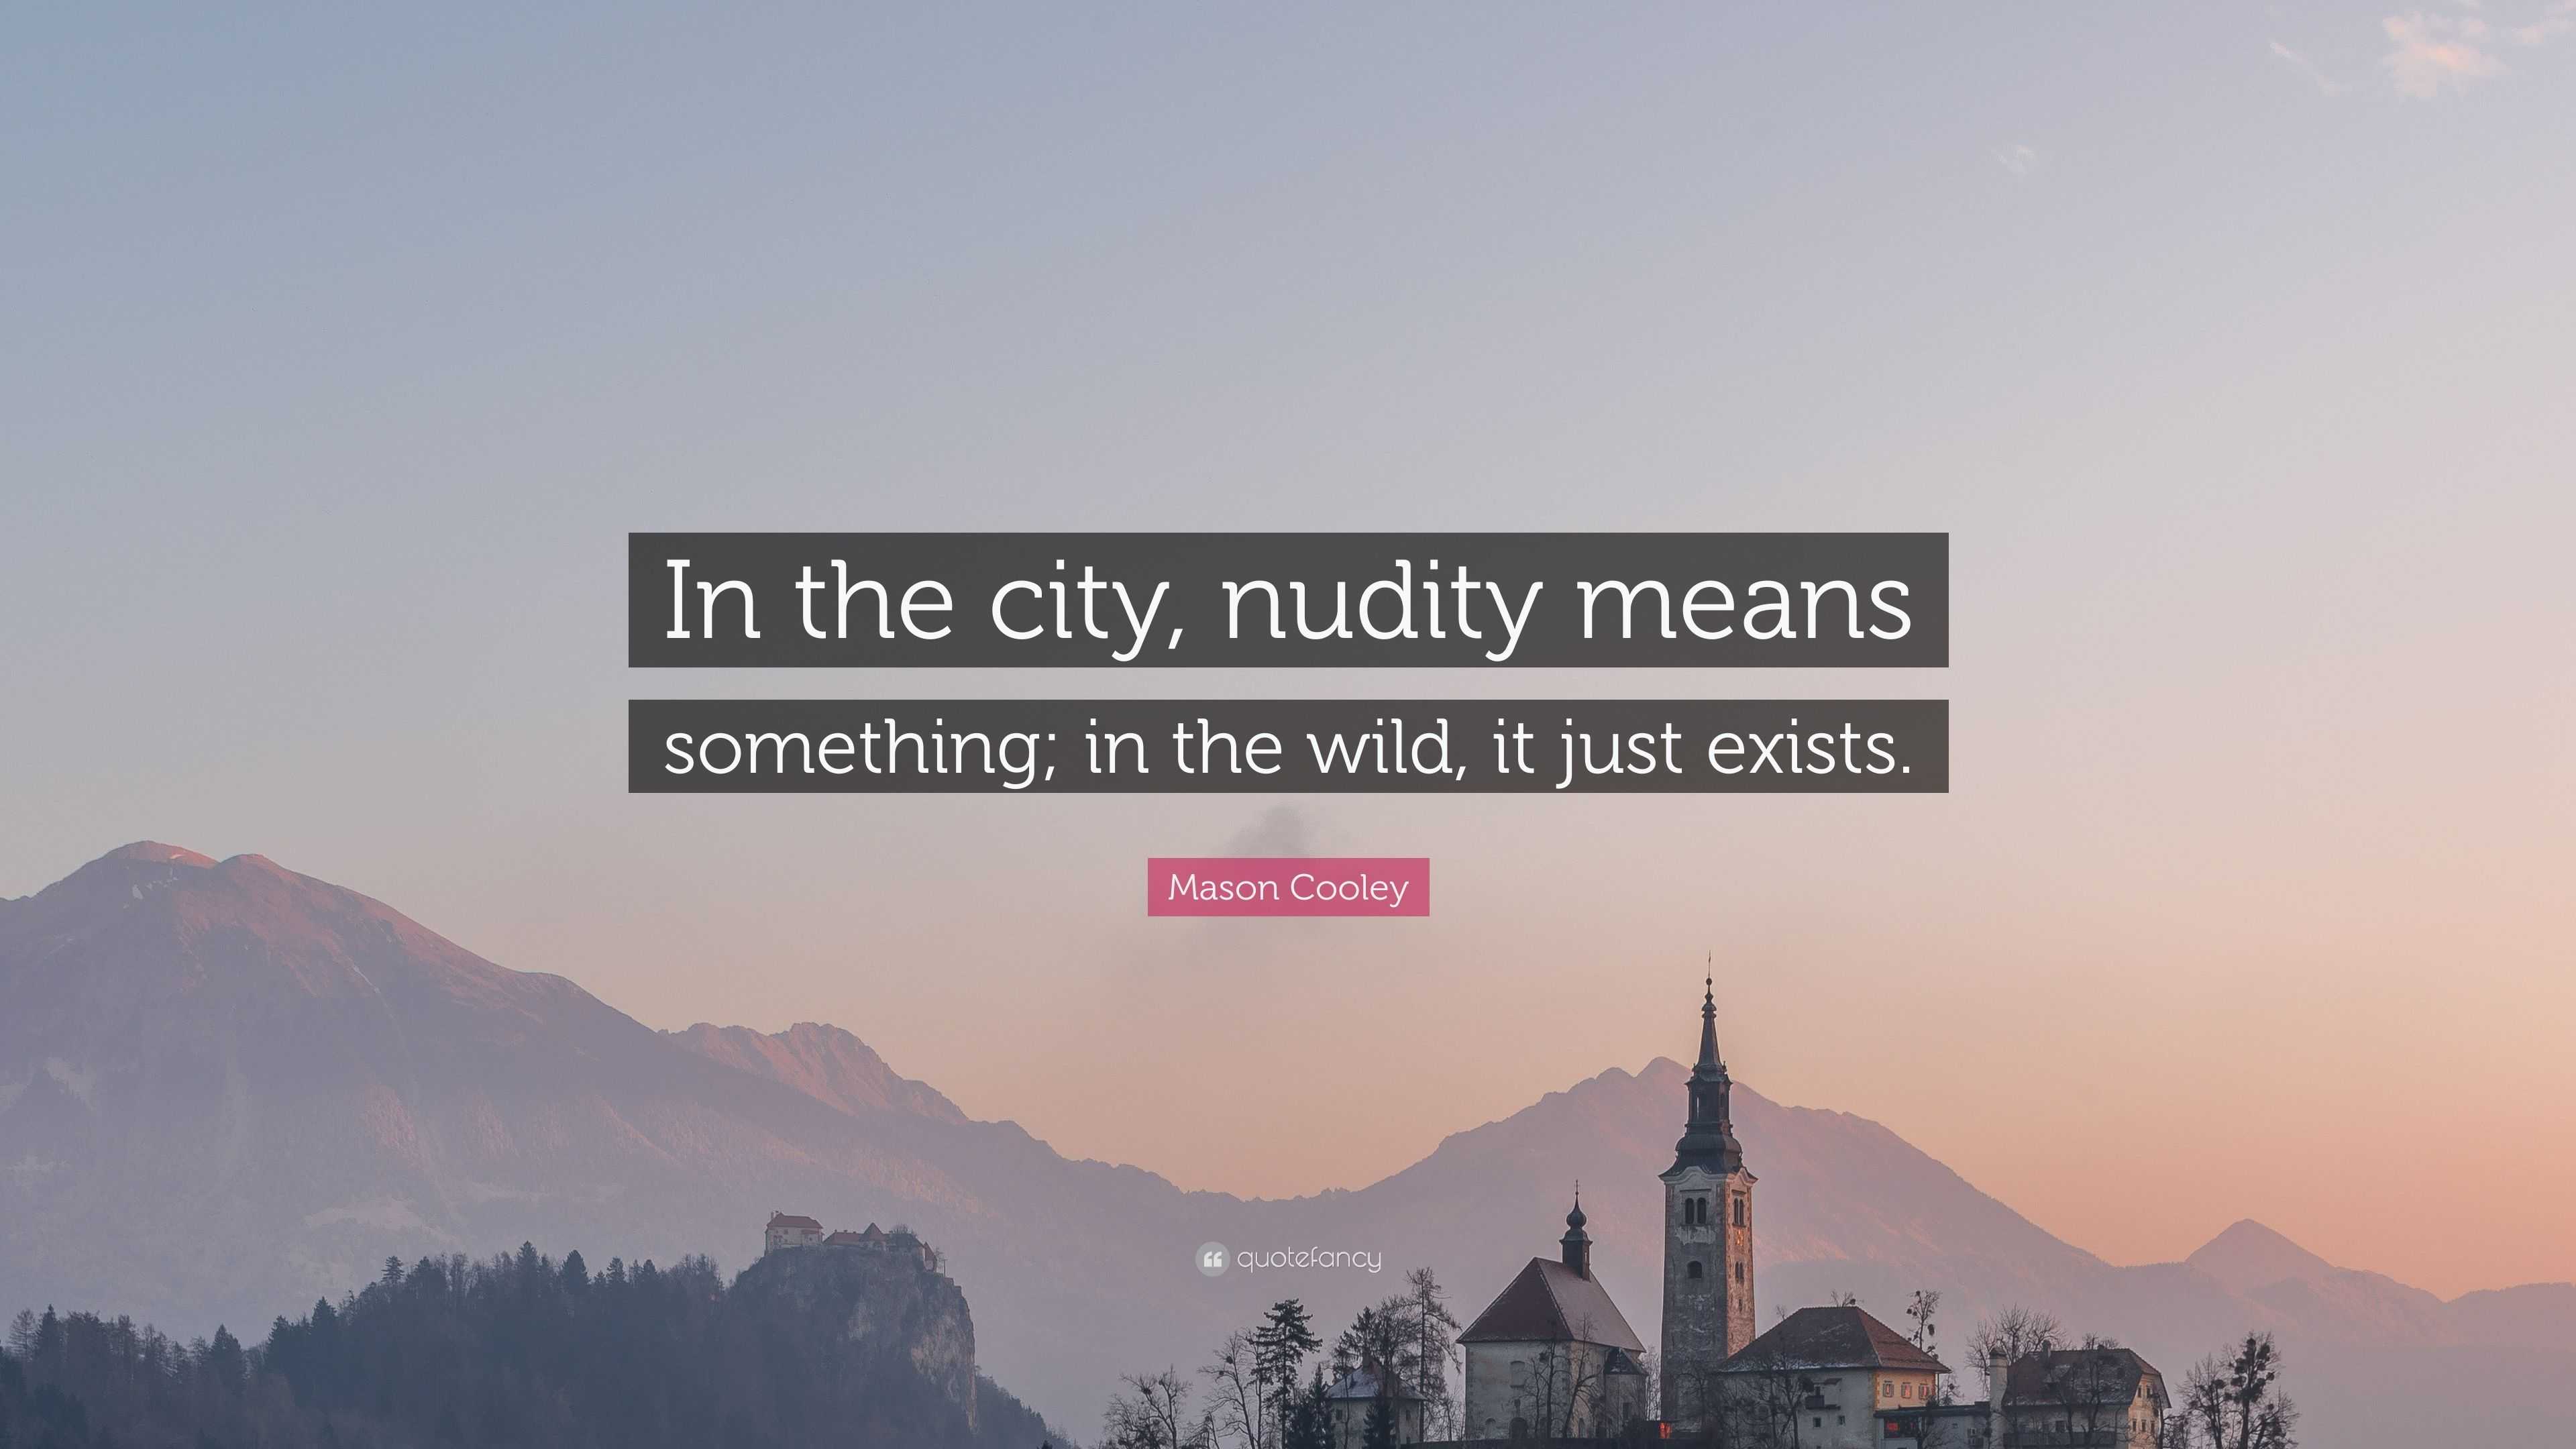 Mason Cooley Quote: “In the city, nudity means something; in the wild, it  just exists.”